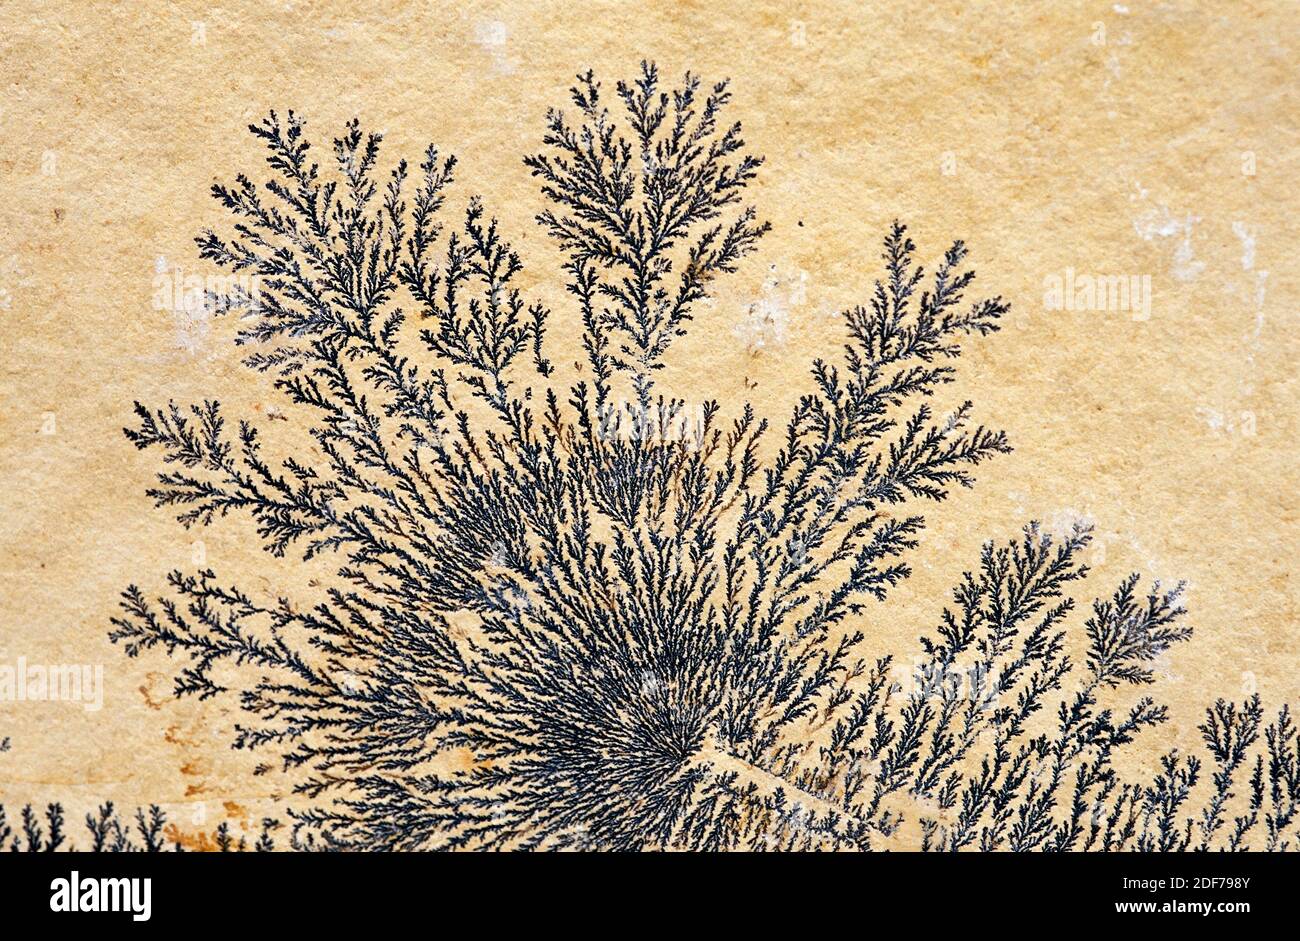 Dendritic pyrolusite on a limestone plate. Pyrolusite is a manganese oxide mineral. Stock Photo